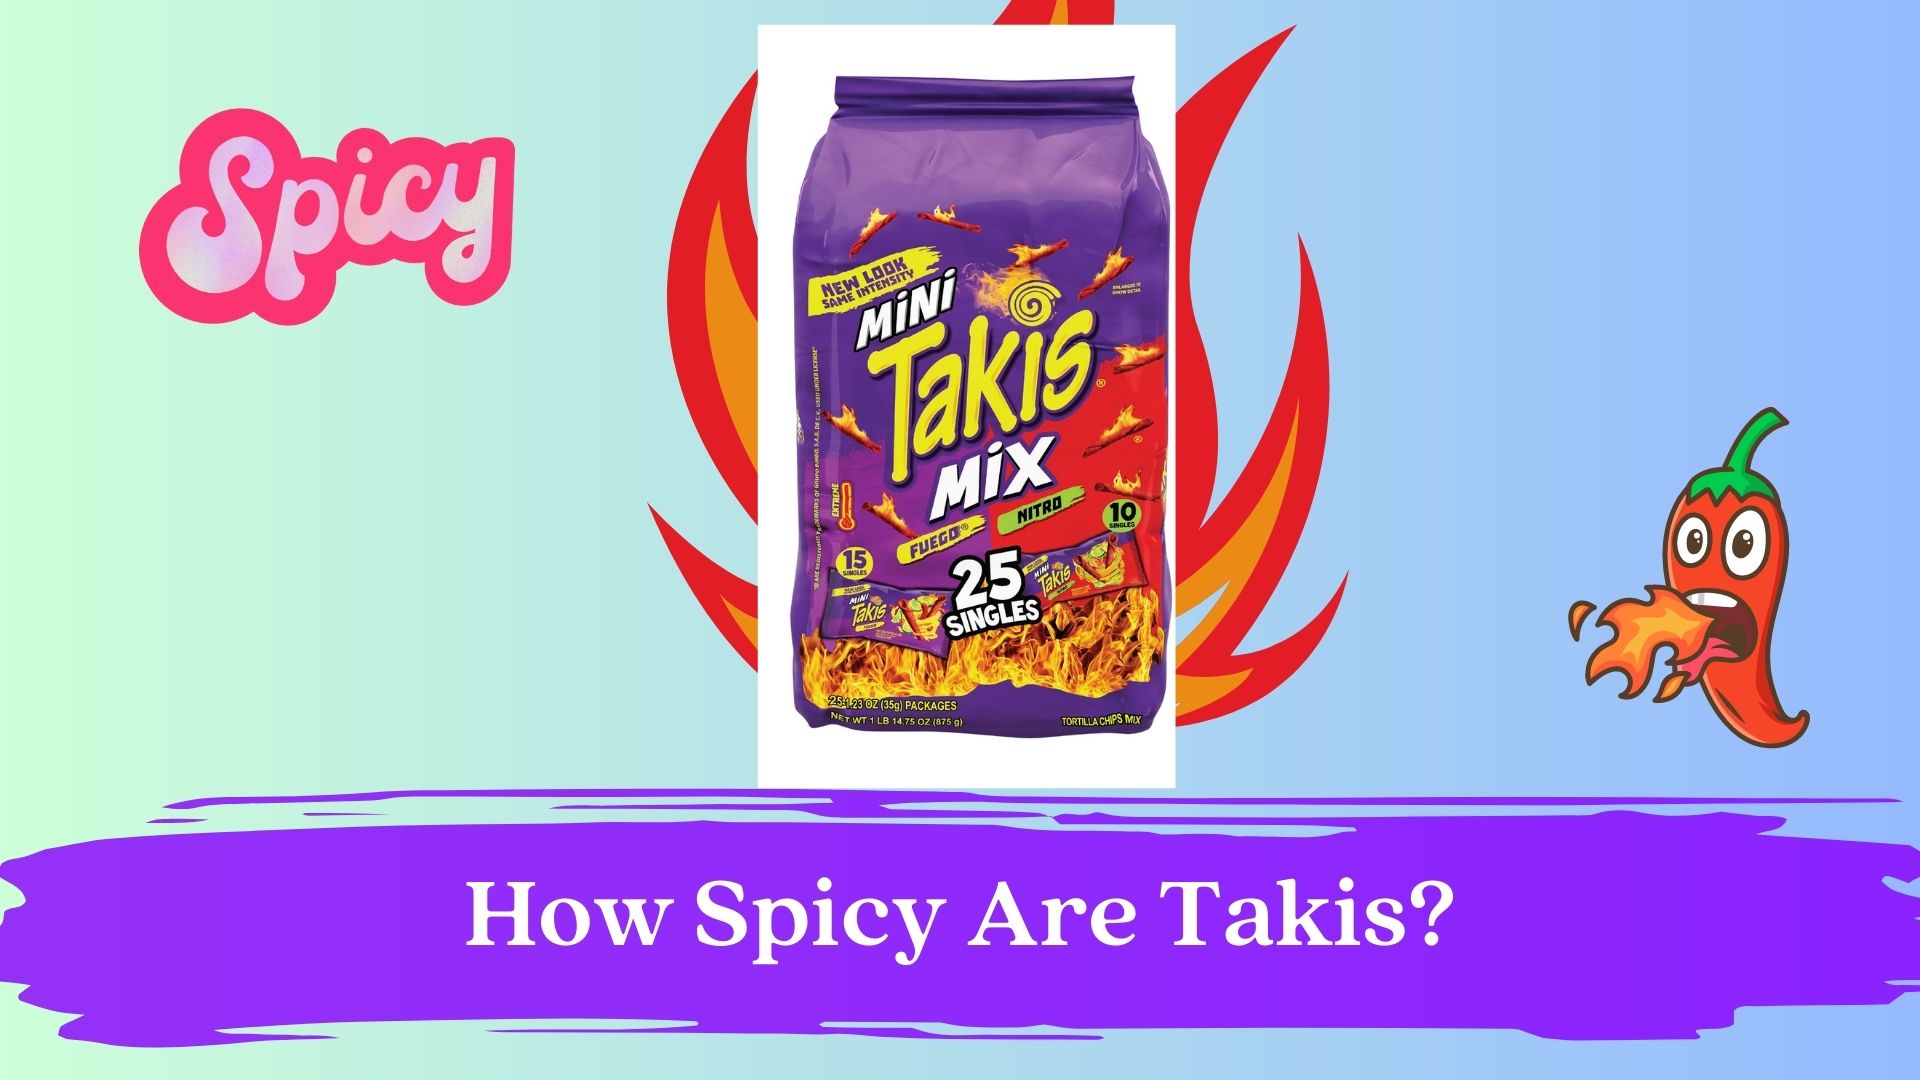 How Spicy Are Takis?